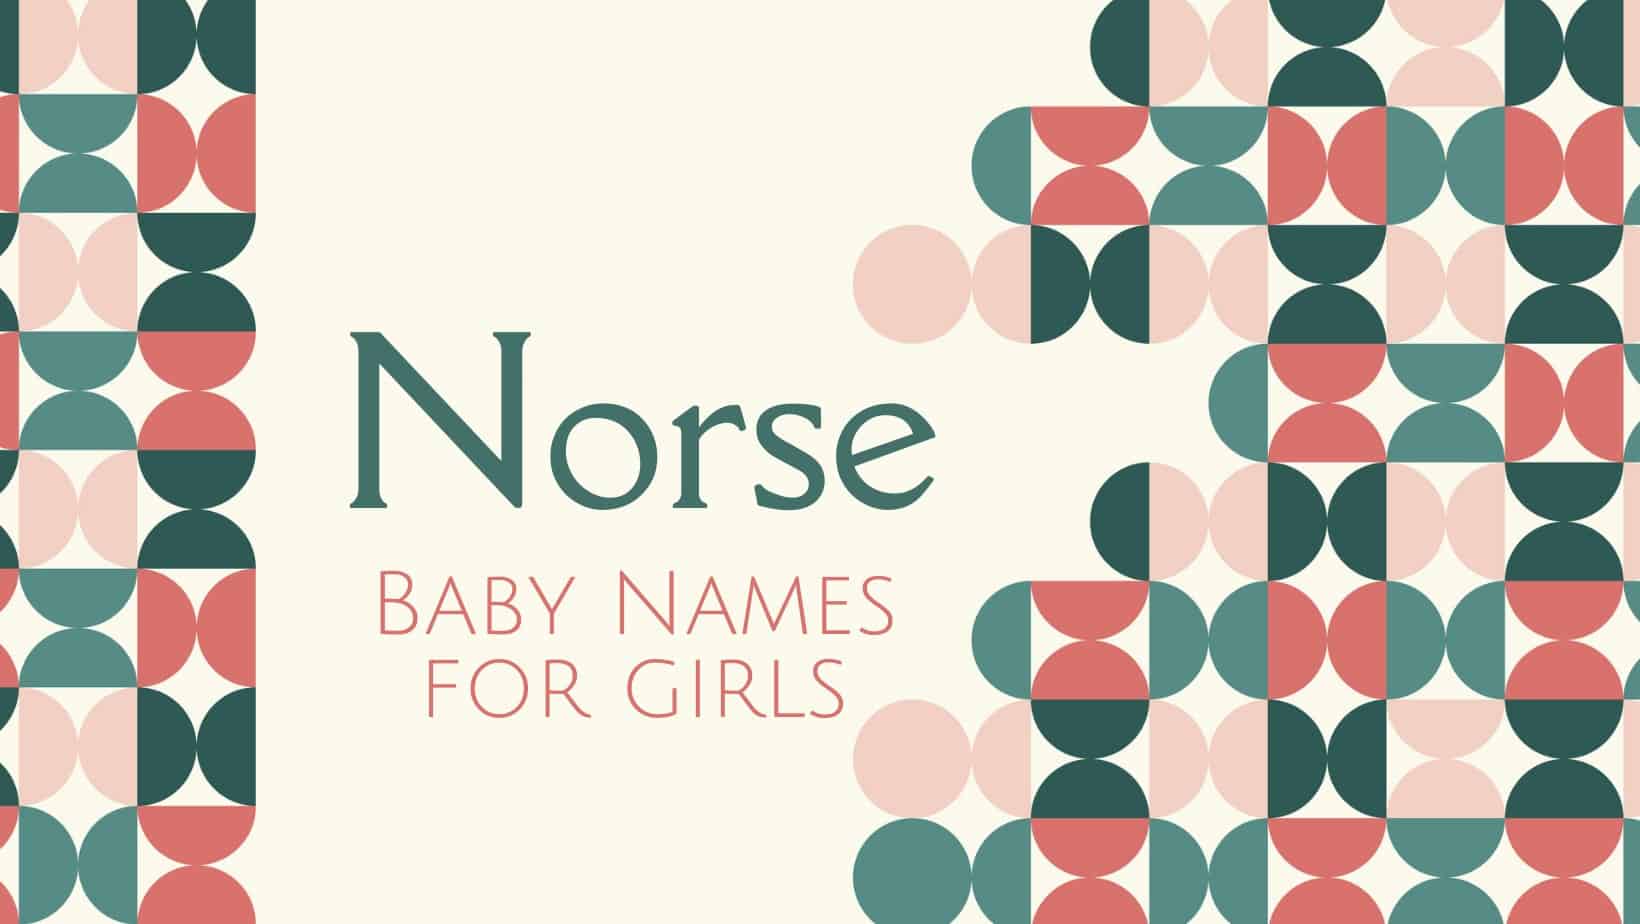 Norse baby names for girls